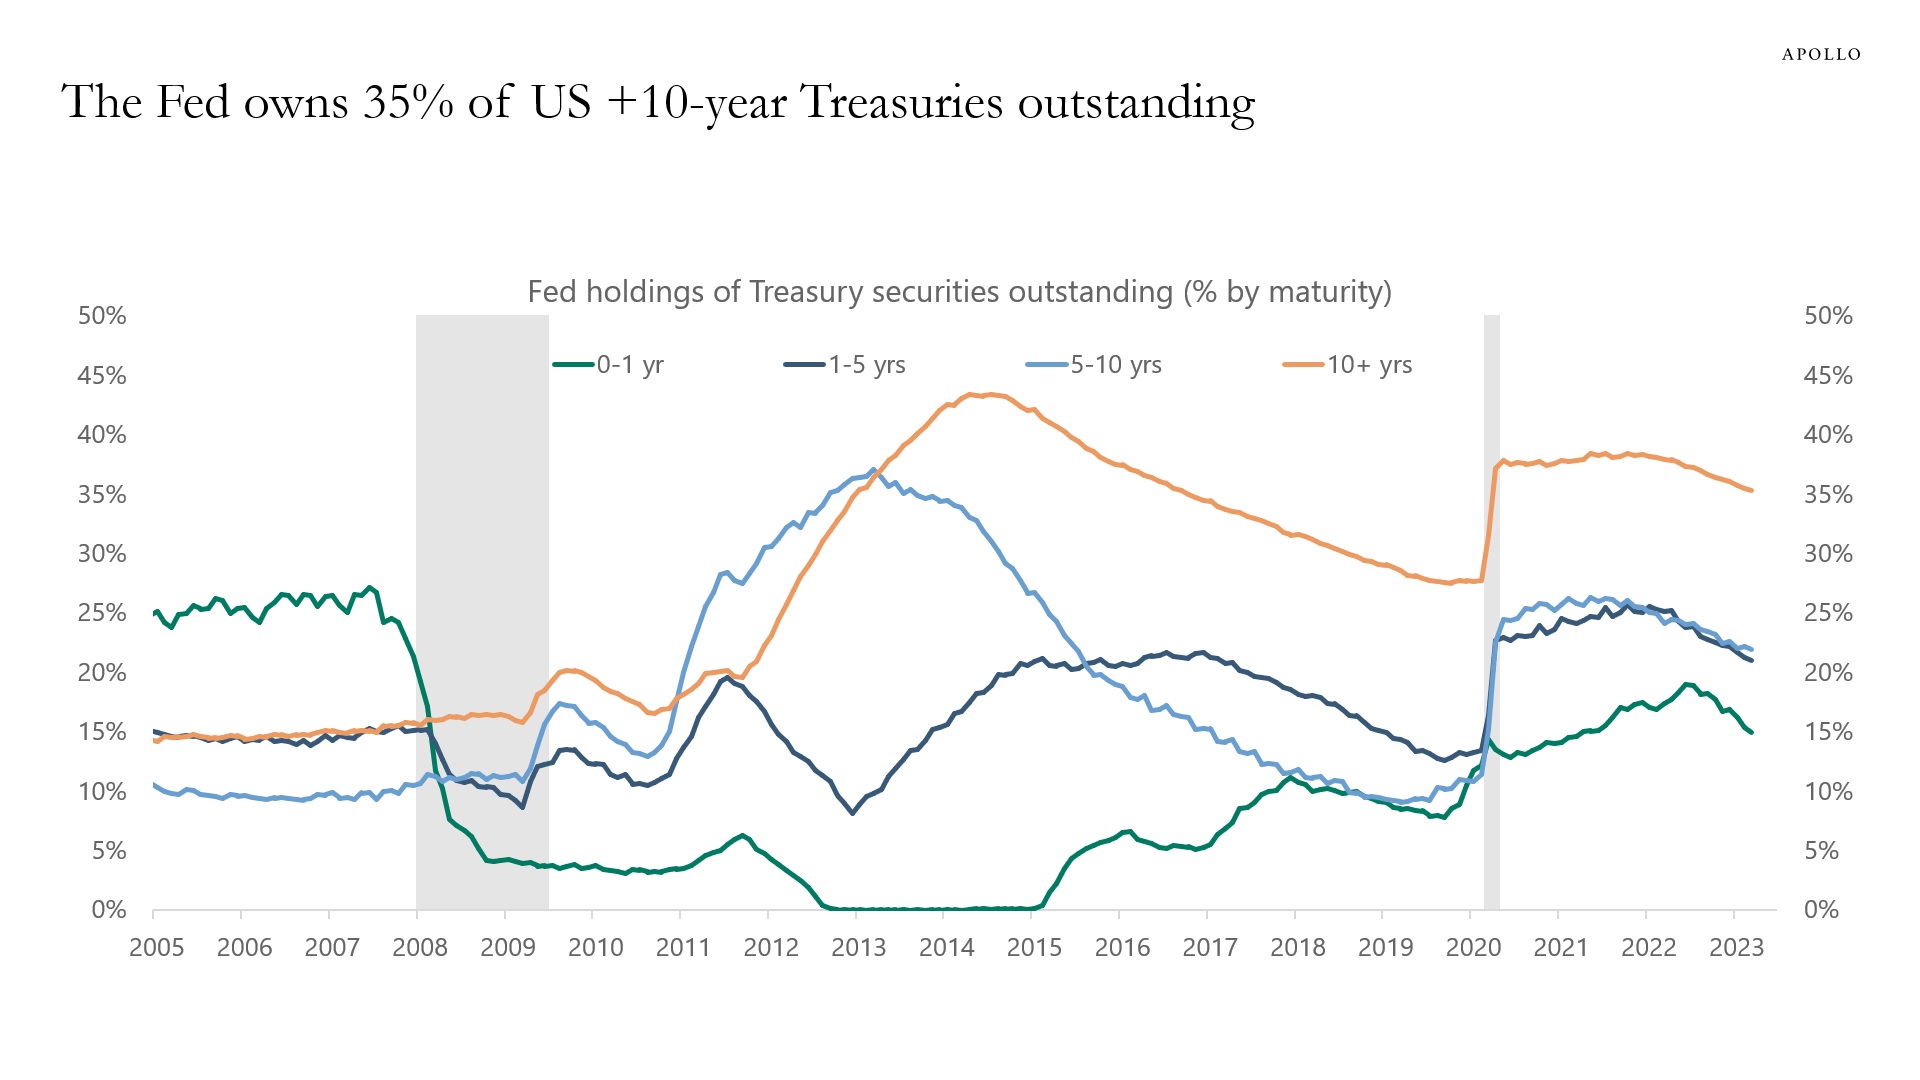 The Fed still holds about 35% of long-term Treasuries.